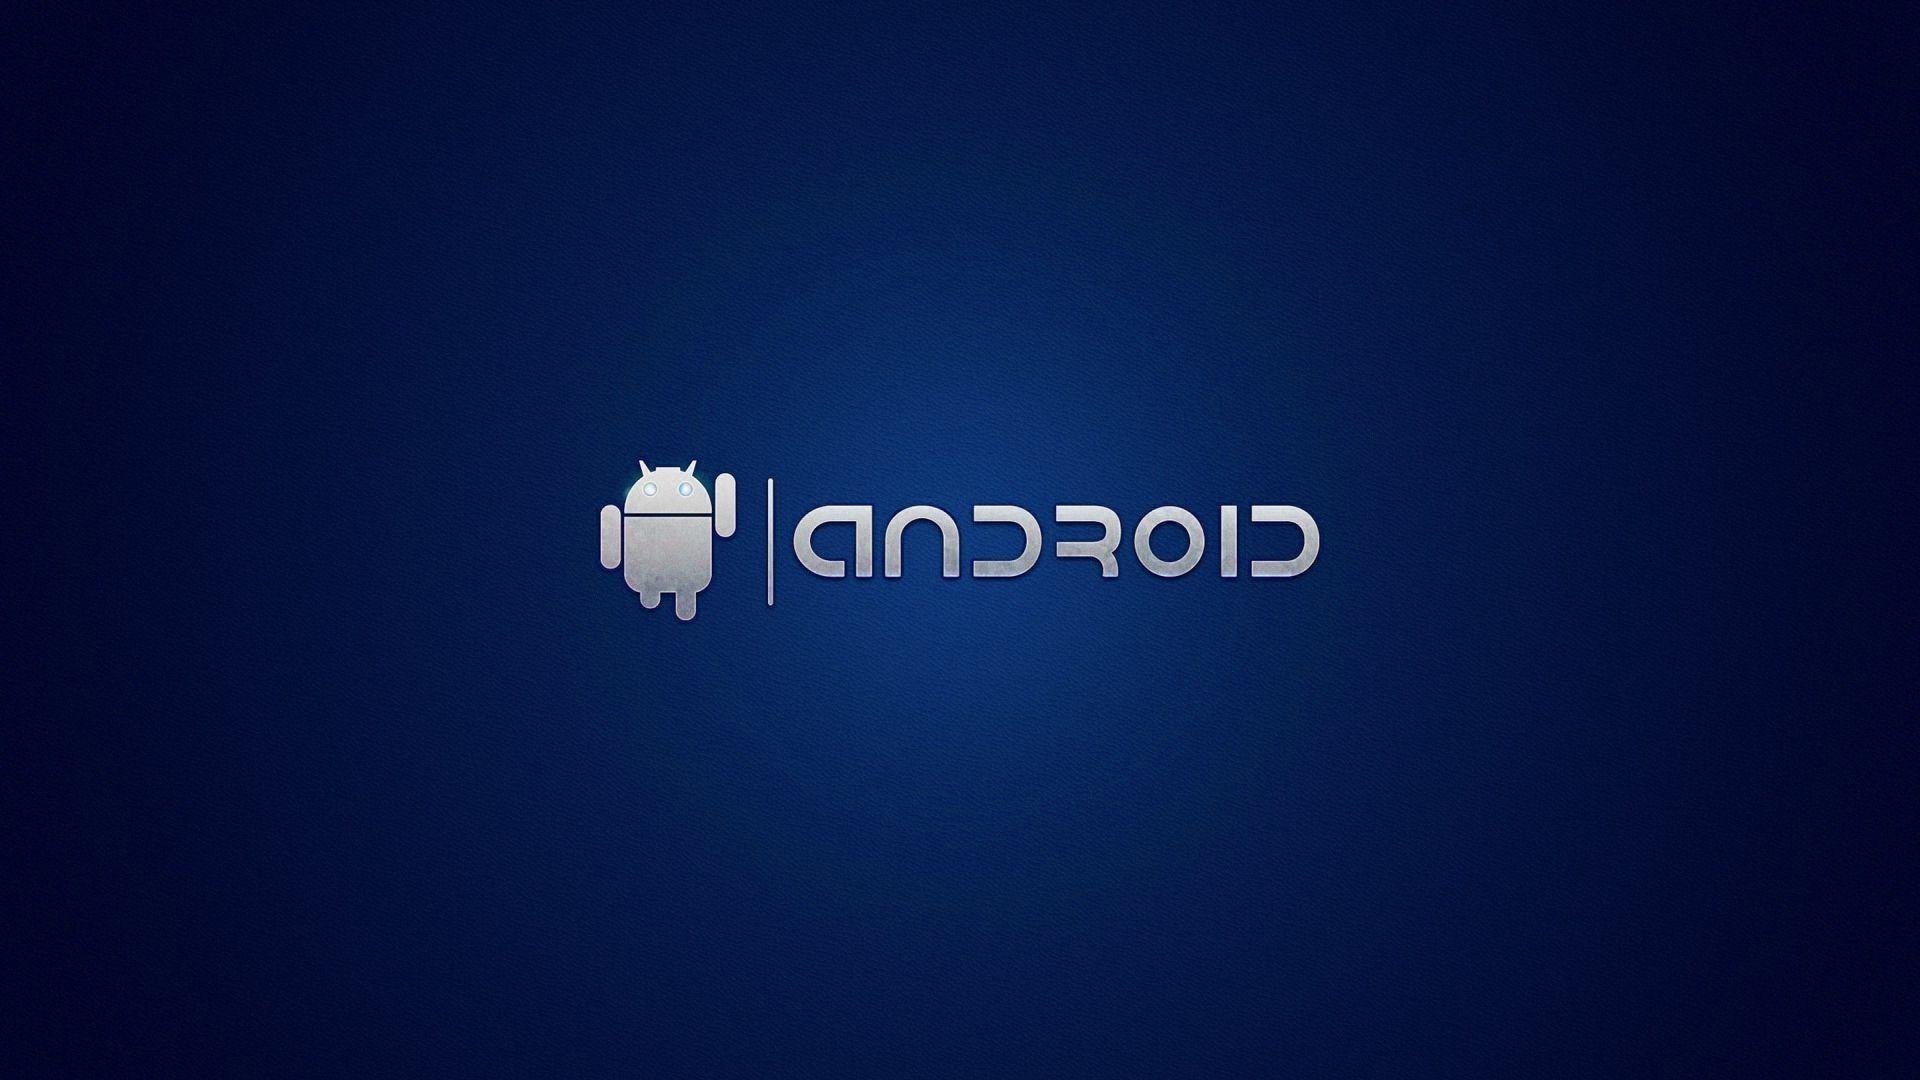 Blue and Silver Logo - Android silver logo on blue background – Wallpaperfool